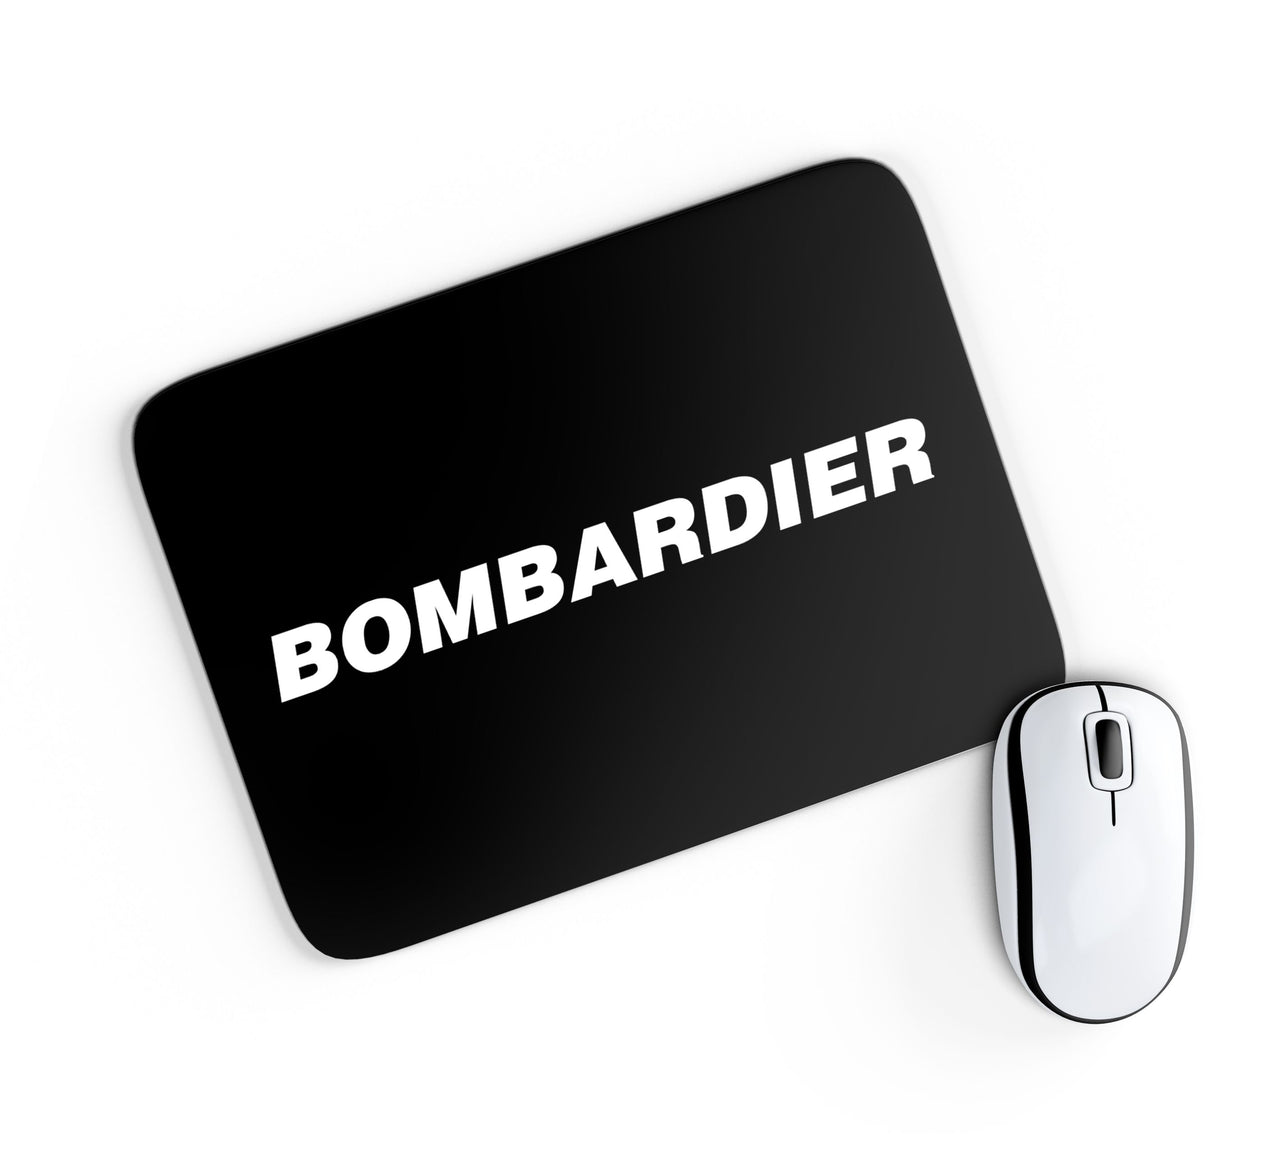 Bombardier & Text Designed Mouse Pads